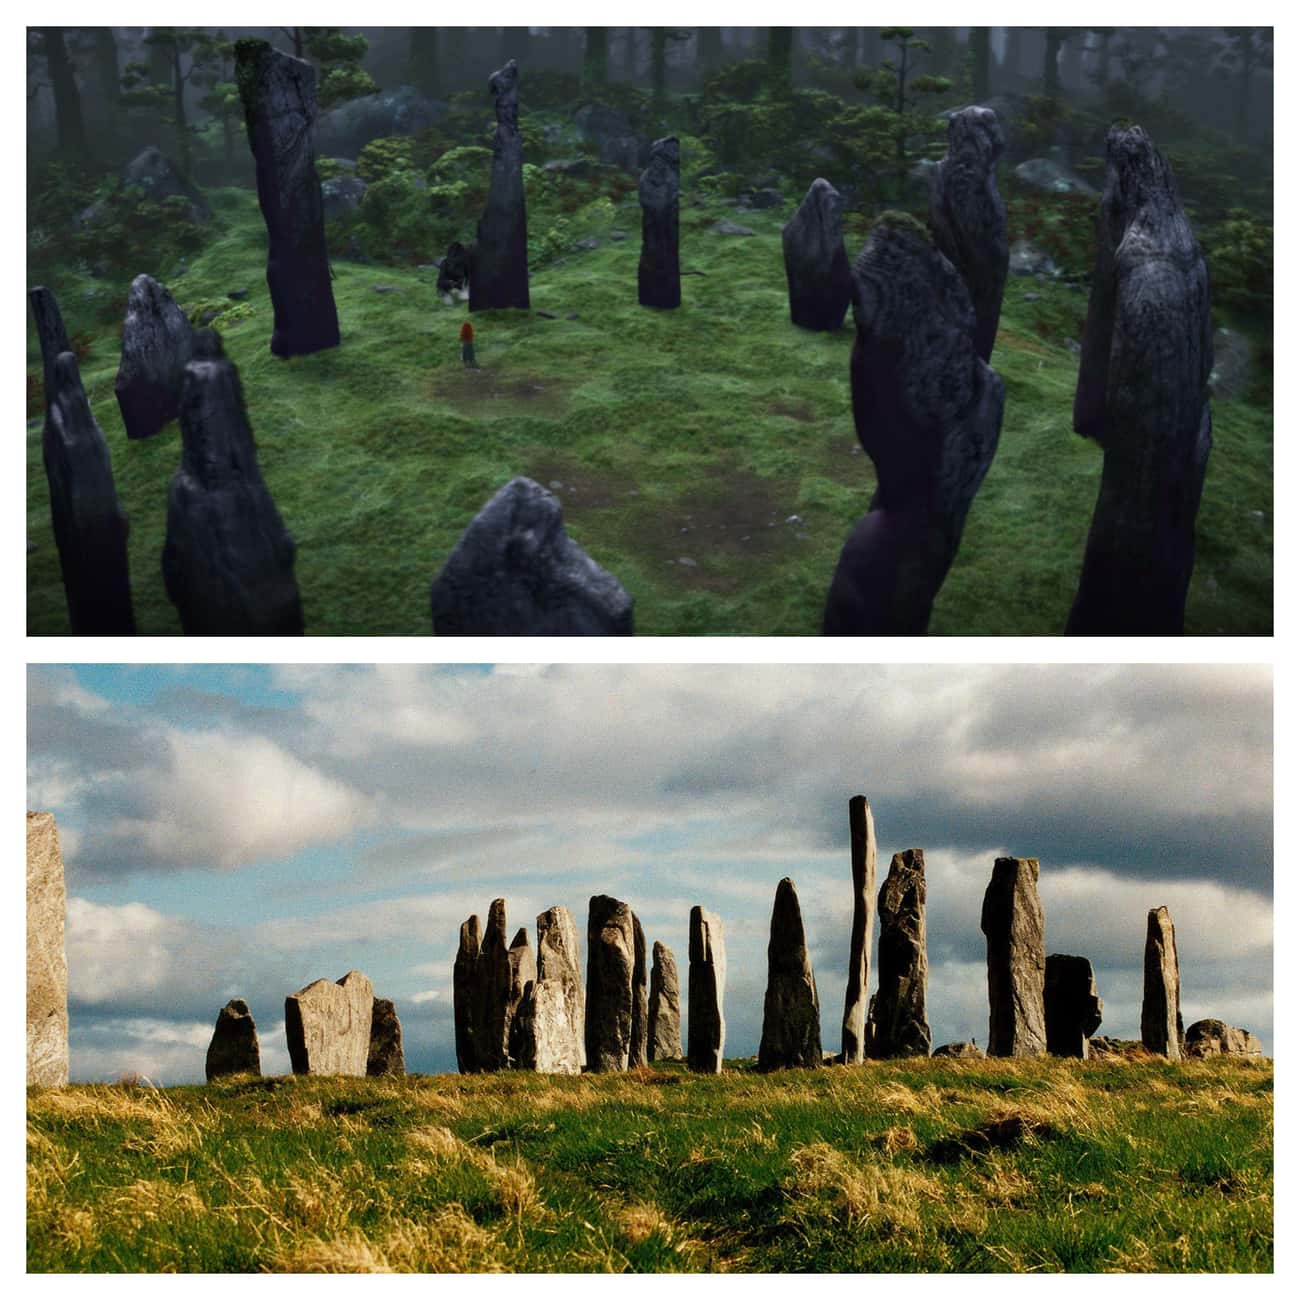 The Ring Of Stones From ‘Brave’ Was Inspired By The Calanais Standing Stones In Scotland